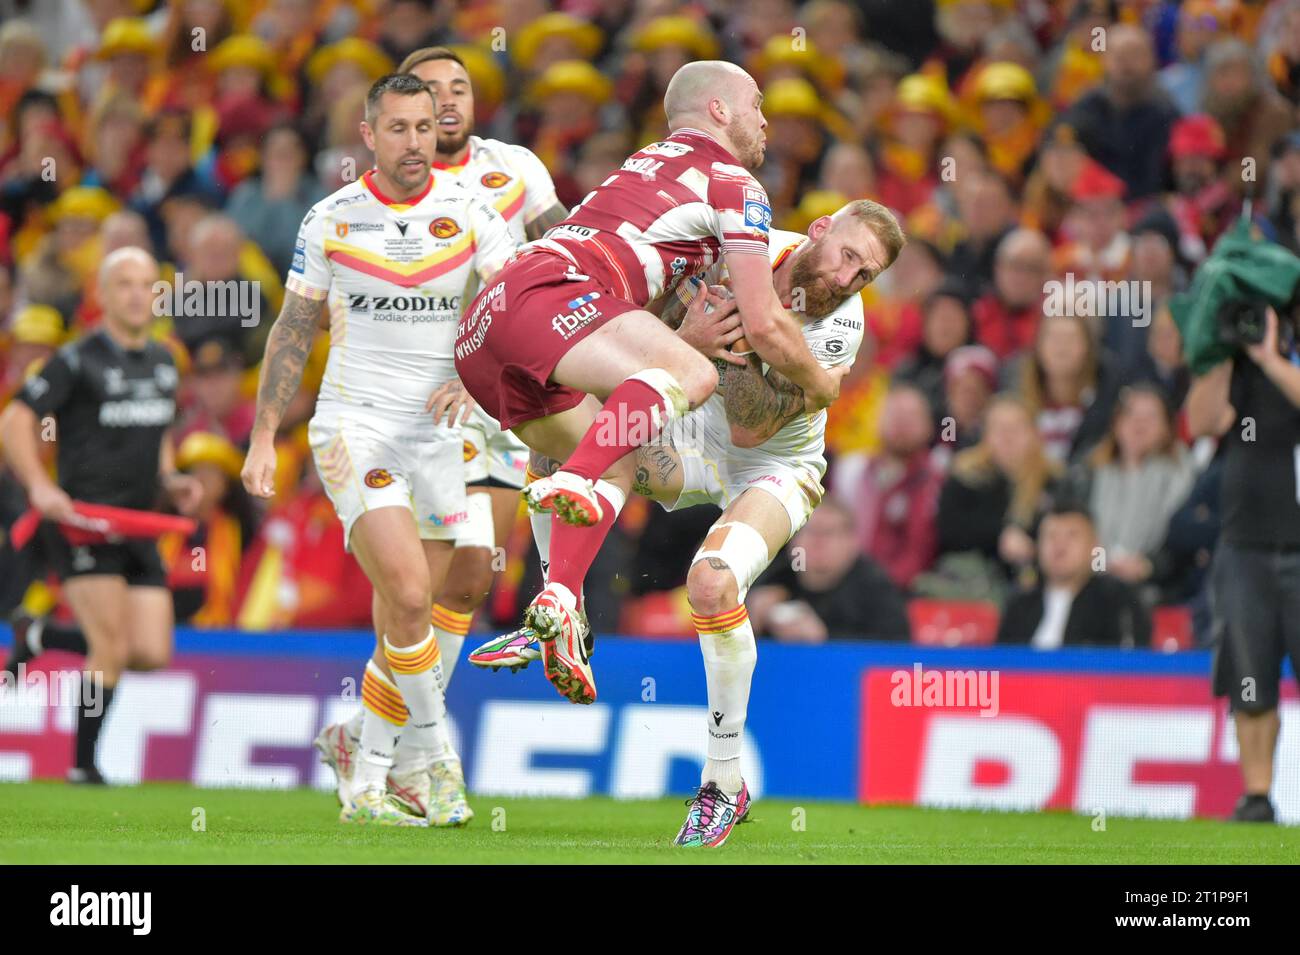 Liam Marshall #5 of Wigan Warriors and Sam Tomkins #29 of Catalans Dragons challenge for a ball in the air during the Betfred Super League Grand Final match Wigan Warriors vs Catalans Dragons at Old Trafford, Manchester, United Kingdom, 14th October 2023 (Photo by Craig Cresswell/News Images) in, on 10/14/2023. (Photo by Craig Cresswell/News Images/Sipa USA) Credit: Sipa USA/Alamy Live News Stock Photo